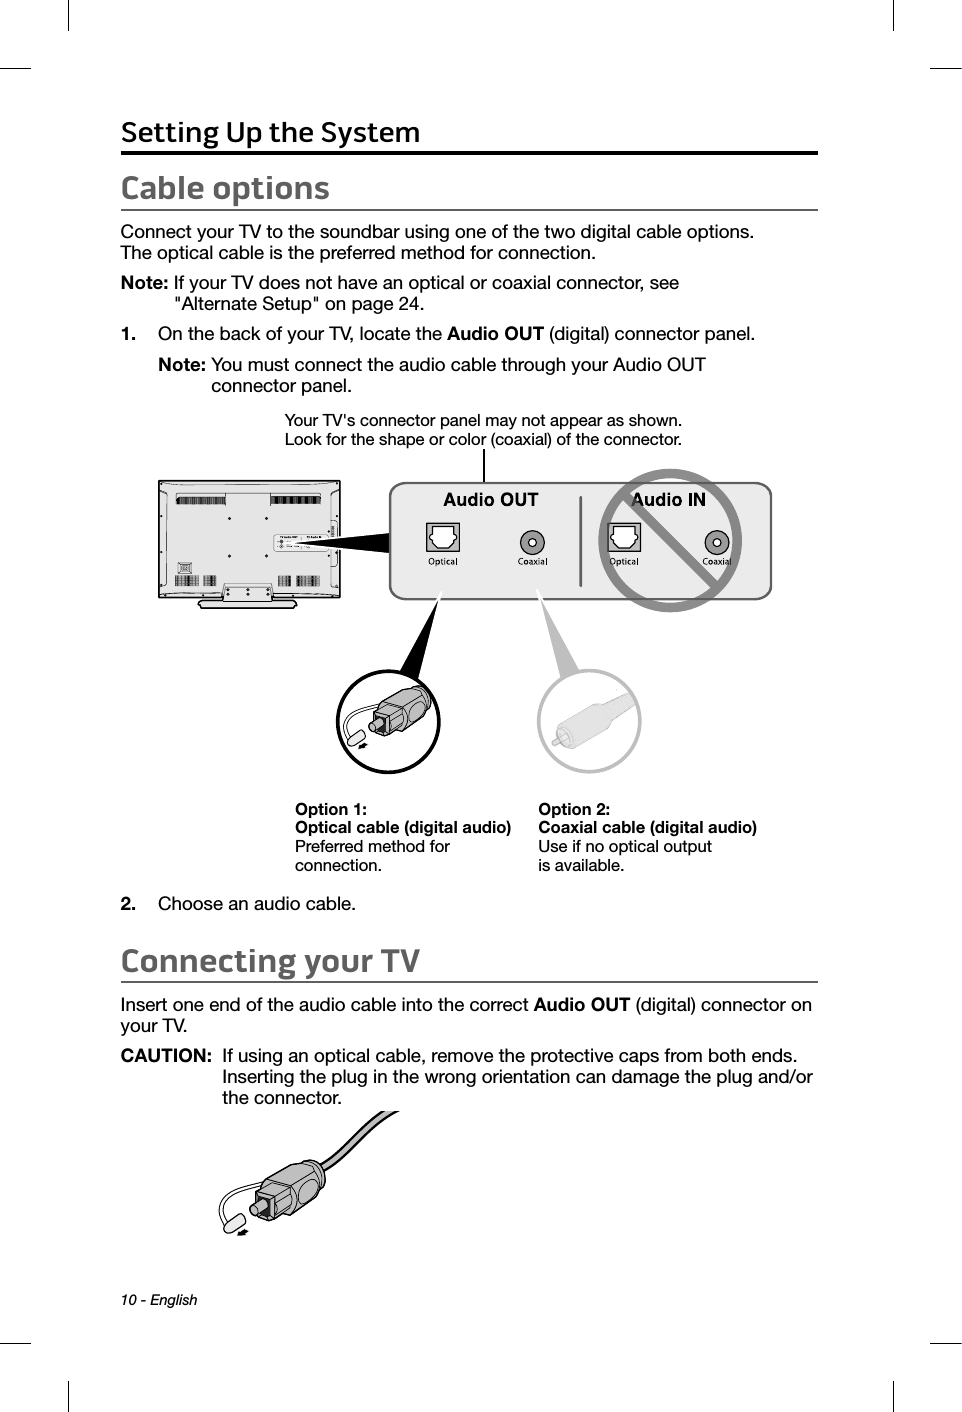 10 - EnglishCable optionsConnect your TV to the soundbar using one of the two digital cable options.  The optical cable is the preferred method for connection.Note:  If your TV does not have an optical or coaxial connector, see  &quot;Alternate Setup&quot; on page 24.1.  On the back of your TV, locate the Audio OUT (digital) connector panel.Note:  You must connect the audio cable through your Audio OUT  connector panel. Option 1: Optical cable (digital audio) Preferred method for  connection.Option 2: Coaxial cable (digital audio) Use if no optical output  is available.Your TV&apos;s connector panel may not appear as shown. Look for the shape or color (coaxial) of the connector. 2.  Choose an audio cable.Connecting your TVInsert one end of the audio cable into the correct Audio OUT (digital) connector on your TV.CAUTION:   If using an optical cable, remove the protective caps from both ends. Inserting the plug in the wrong orientation can damage the plug and/or the connector.Setting Up the System